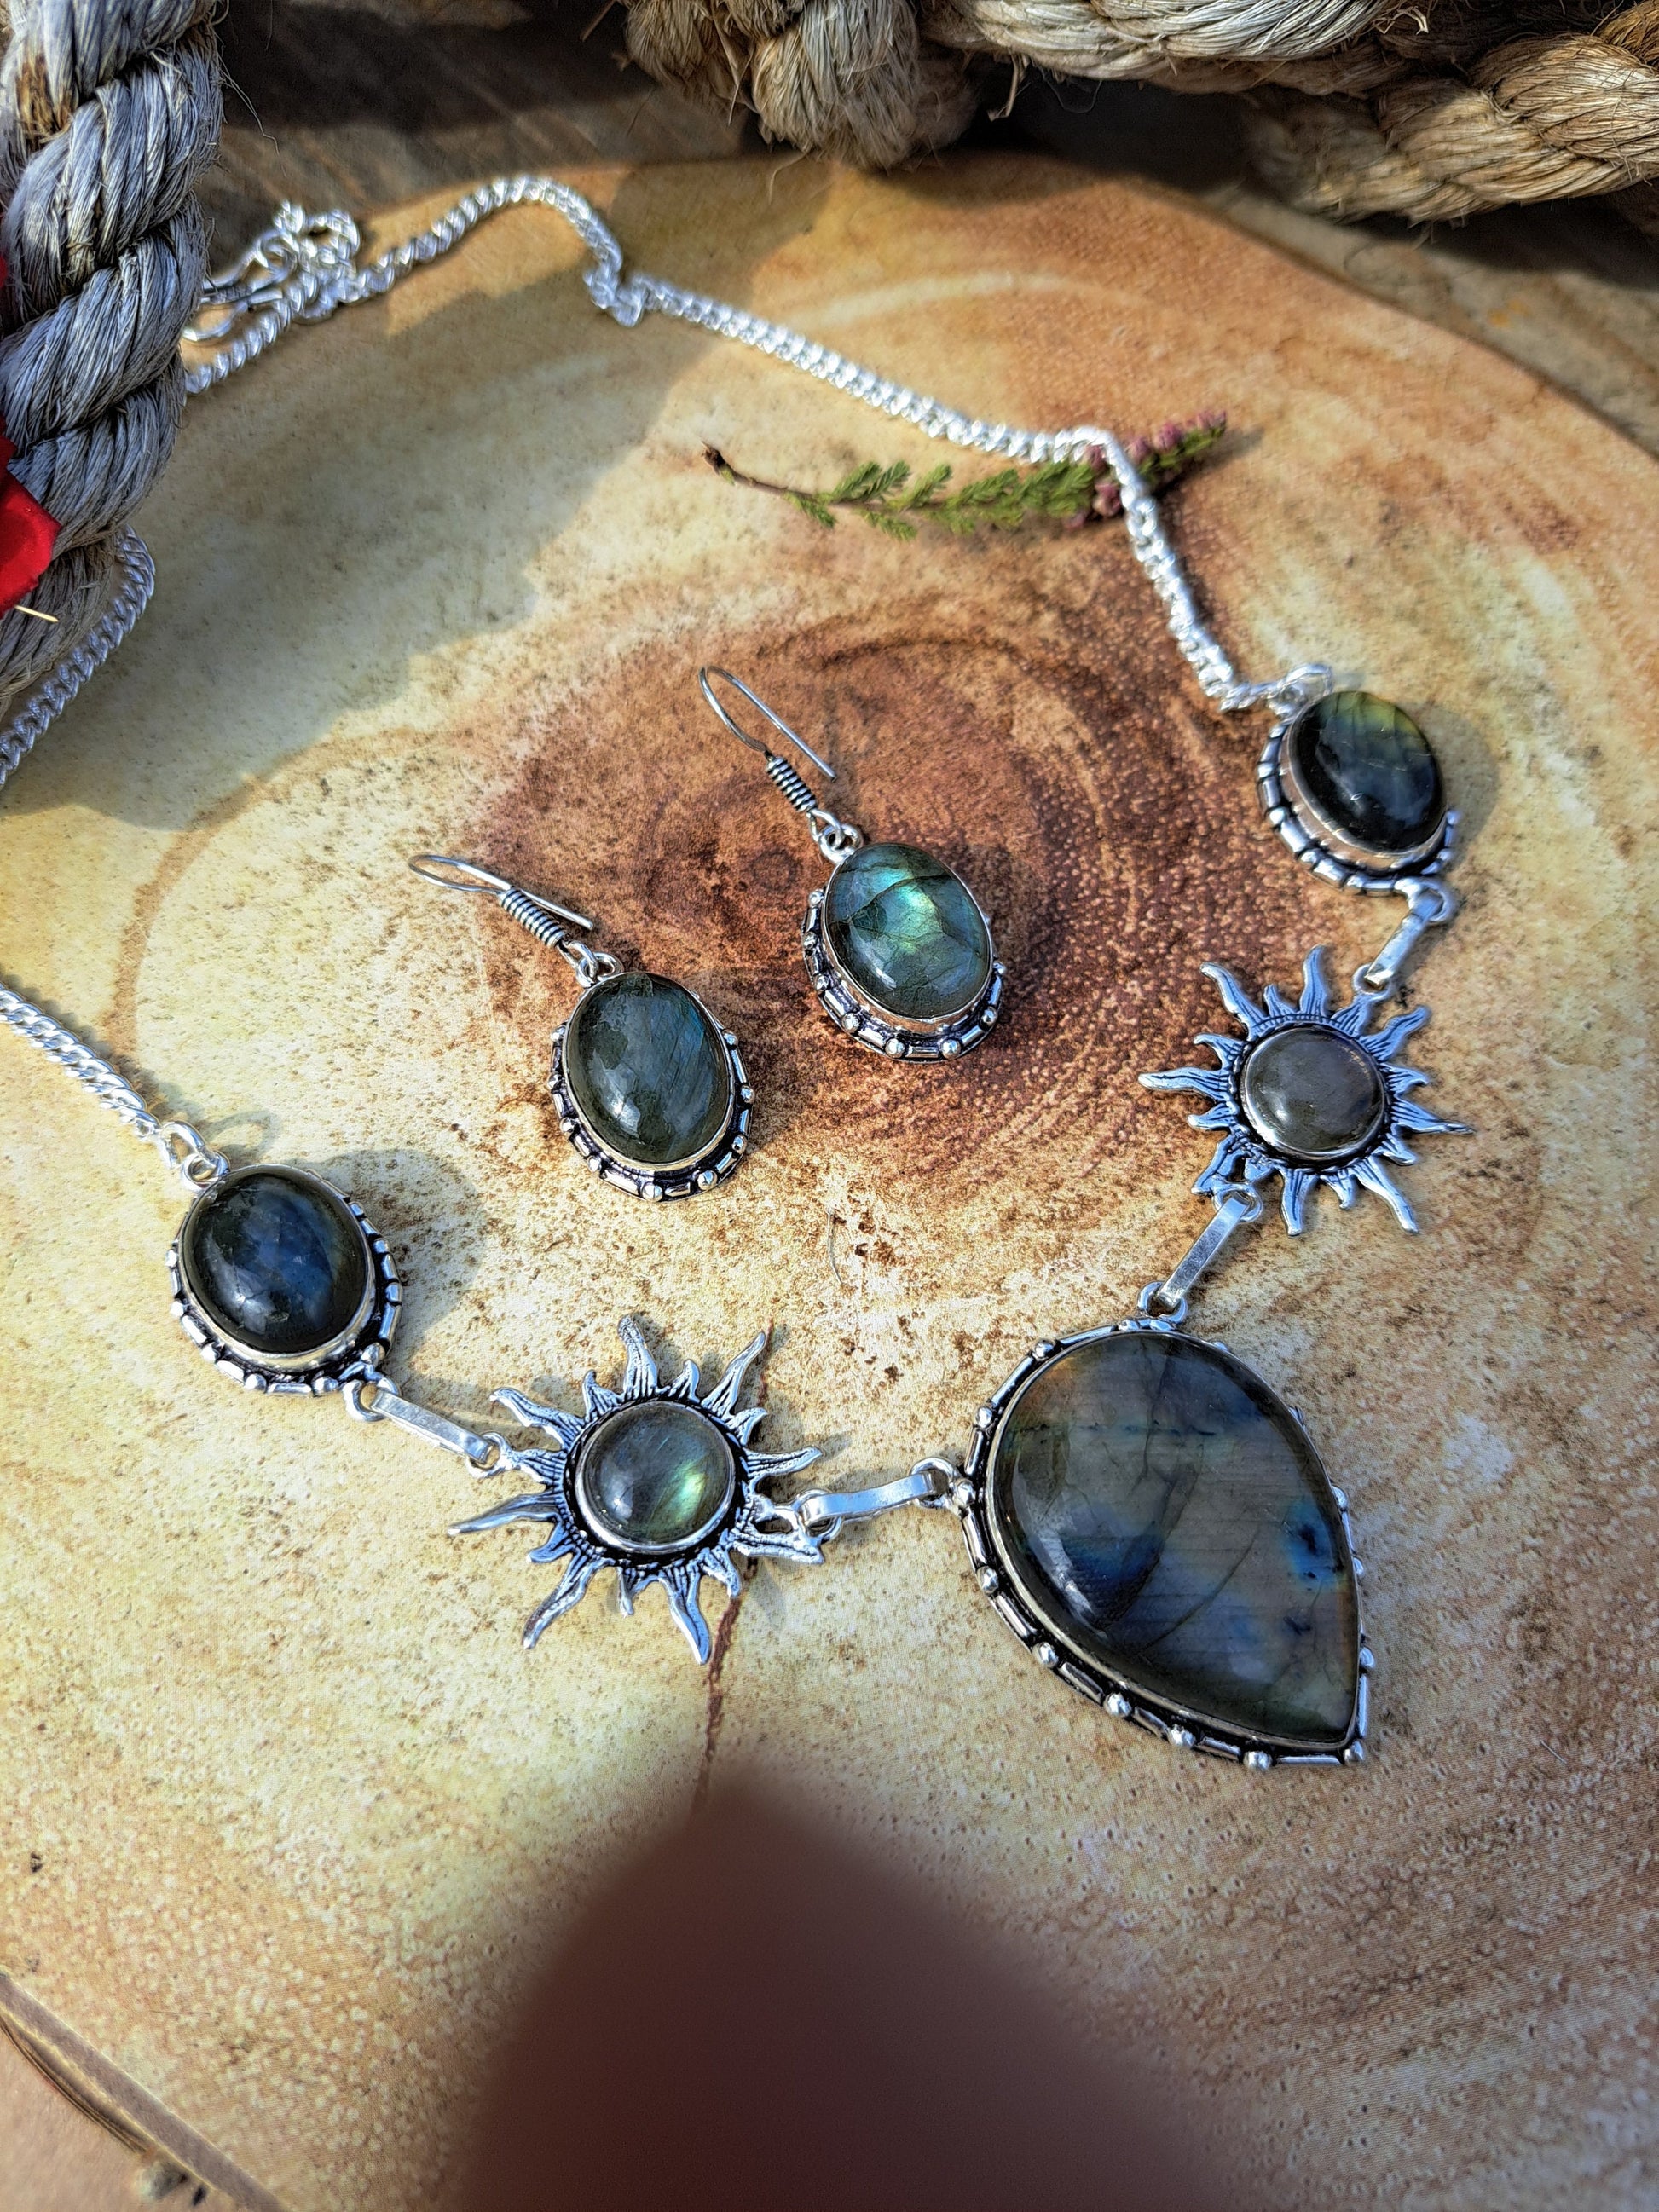 Natural Labradorite Necklace And Earrings Set In Sterling Silver Statement Gemstone Jewellery One Of A Kind